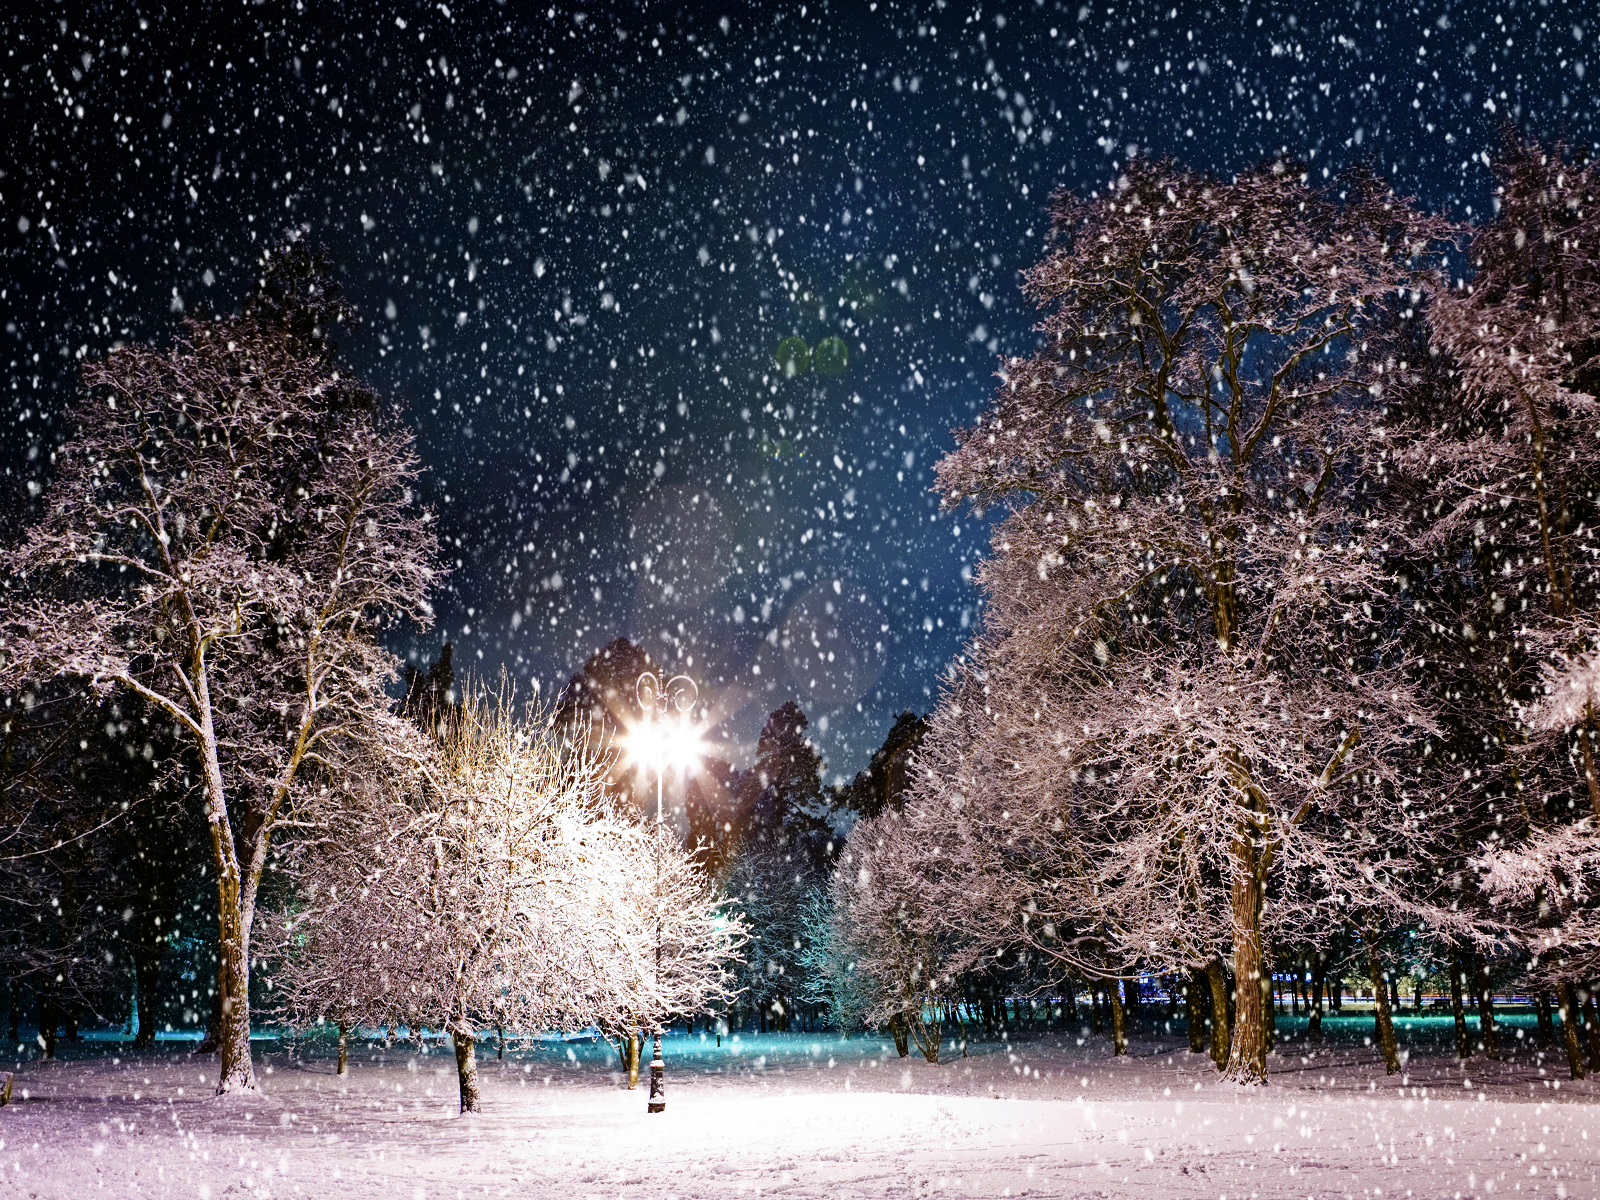 Snowy Night Background   HD Wallpapers Blog